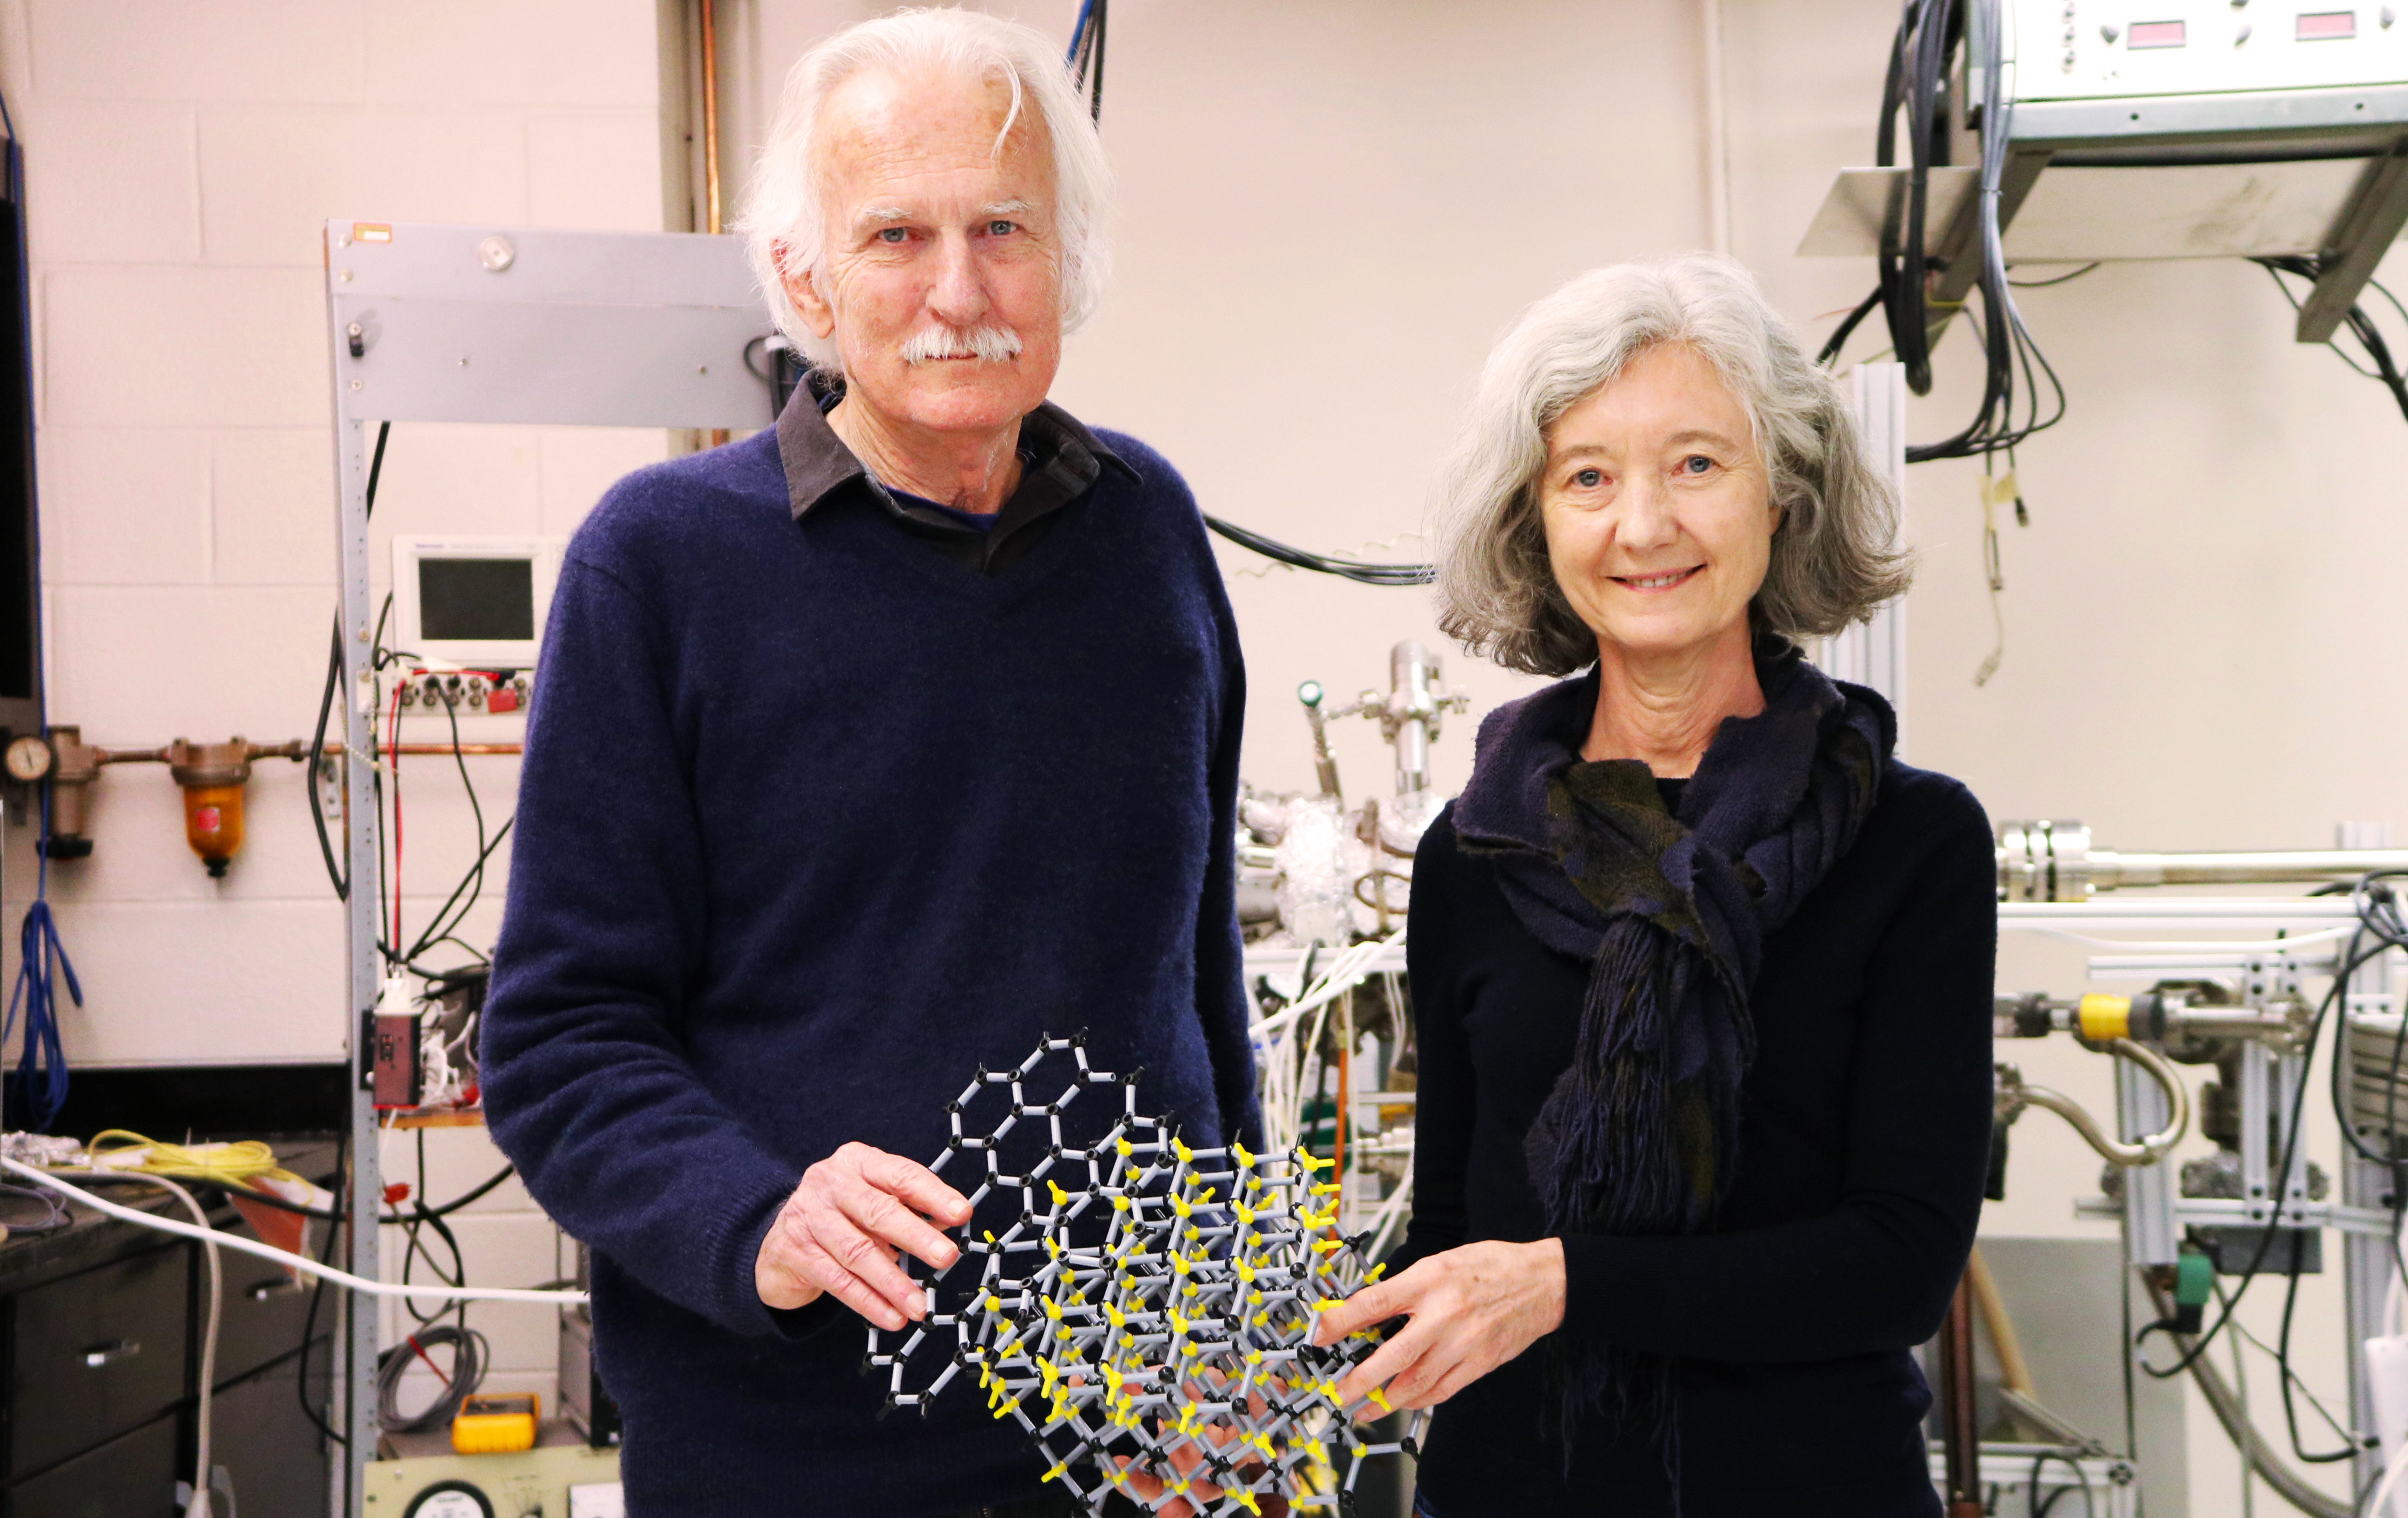 Walter de Heer and Claire Berger with a model of how computer chip material is made (Photo Jess Hunt-Ralston).jpg